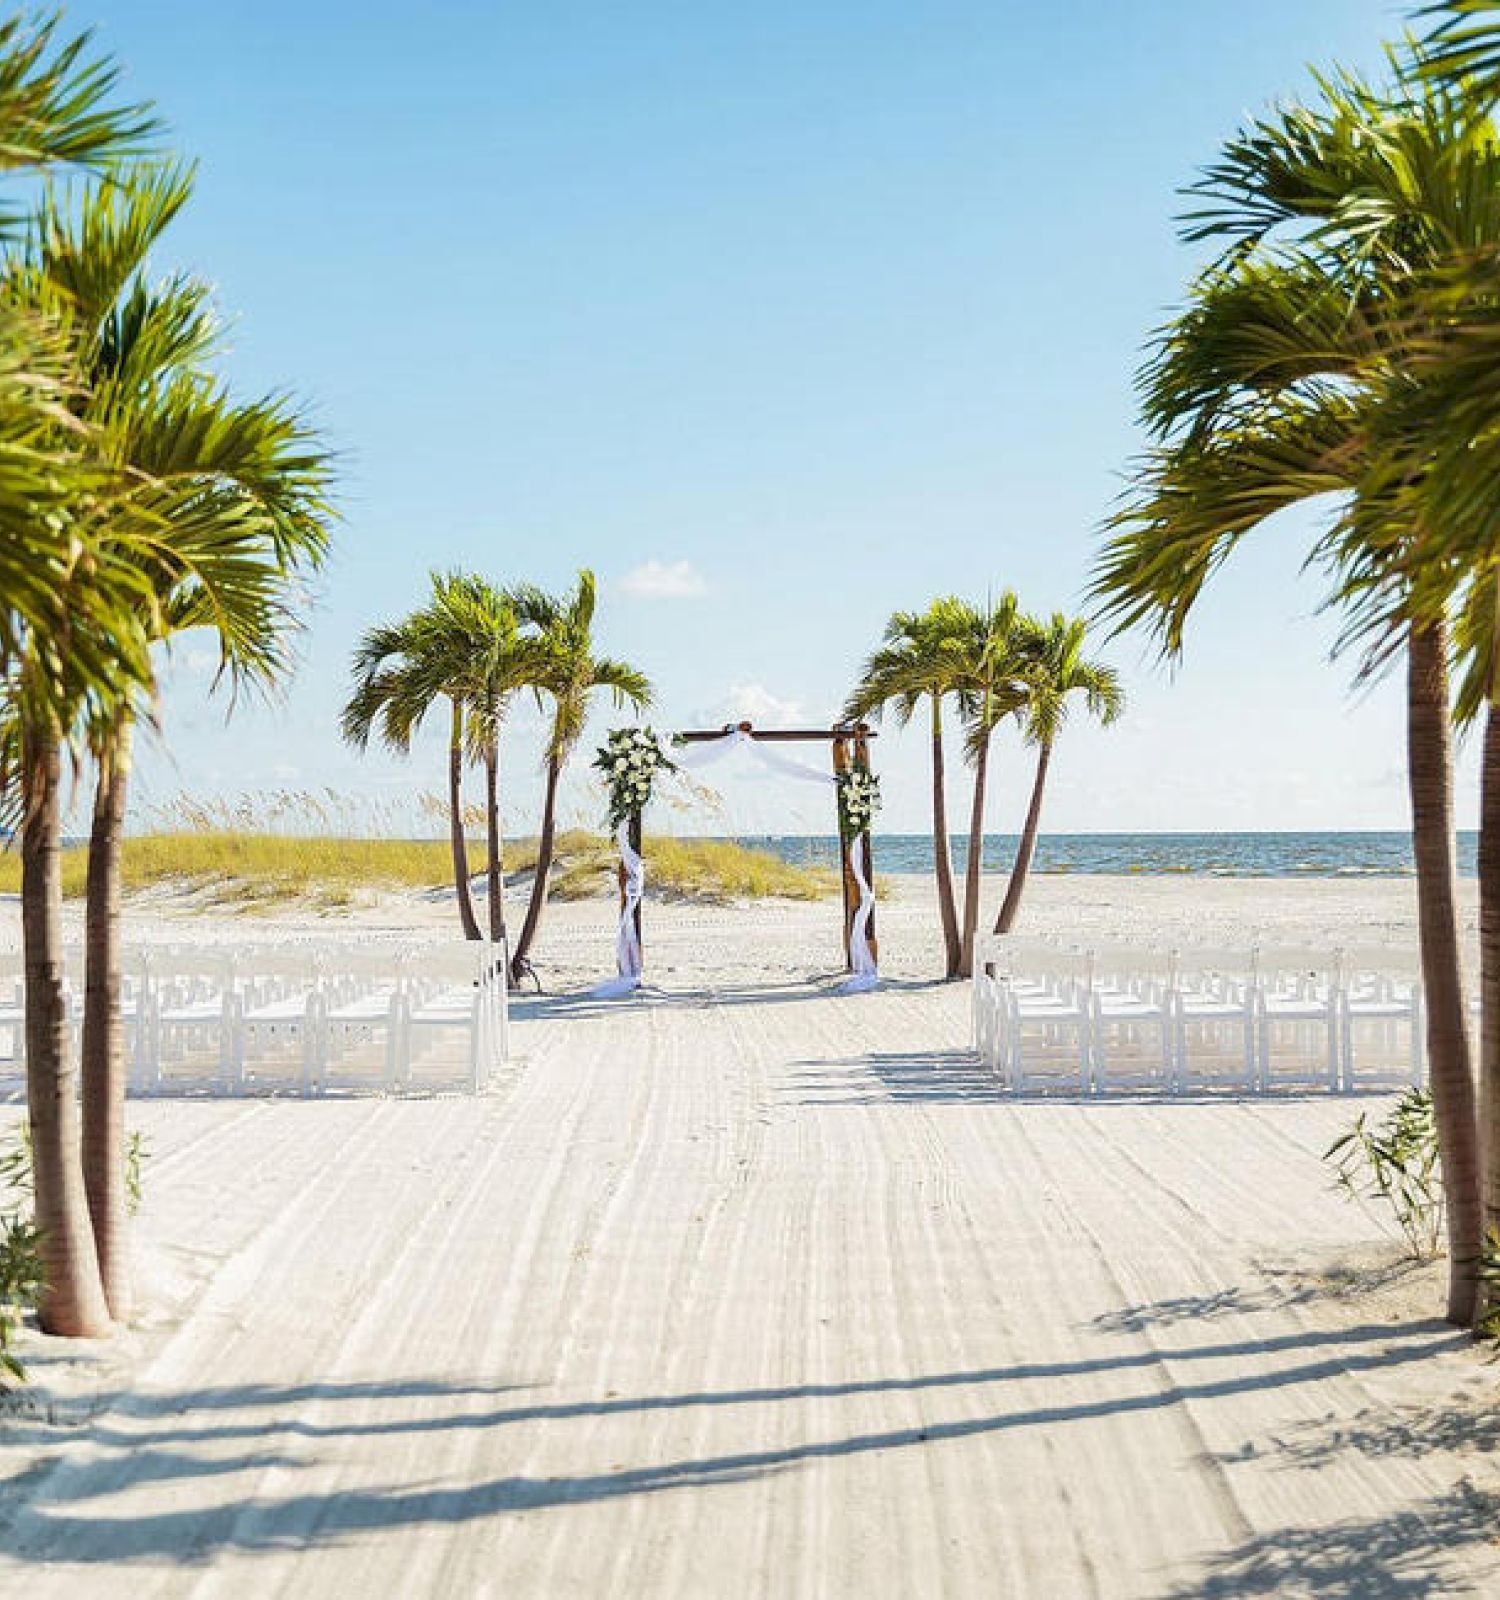 A beach wedding setup with chairs, a wooden pathway, palm trees, and a clear sky.